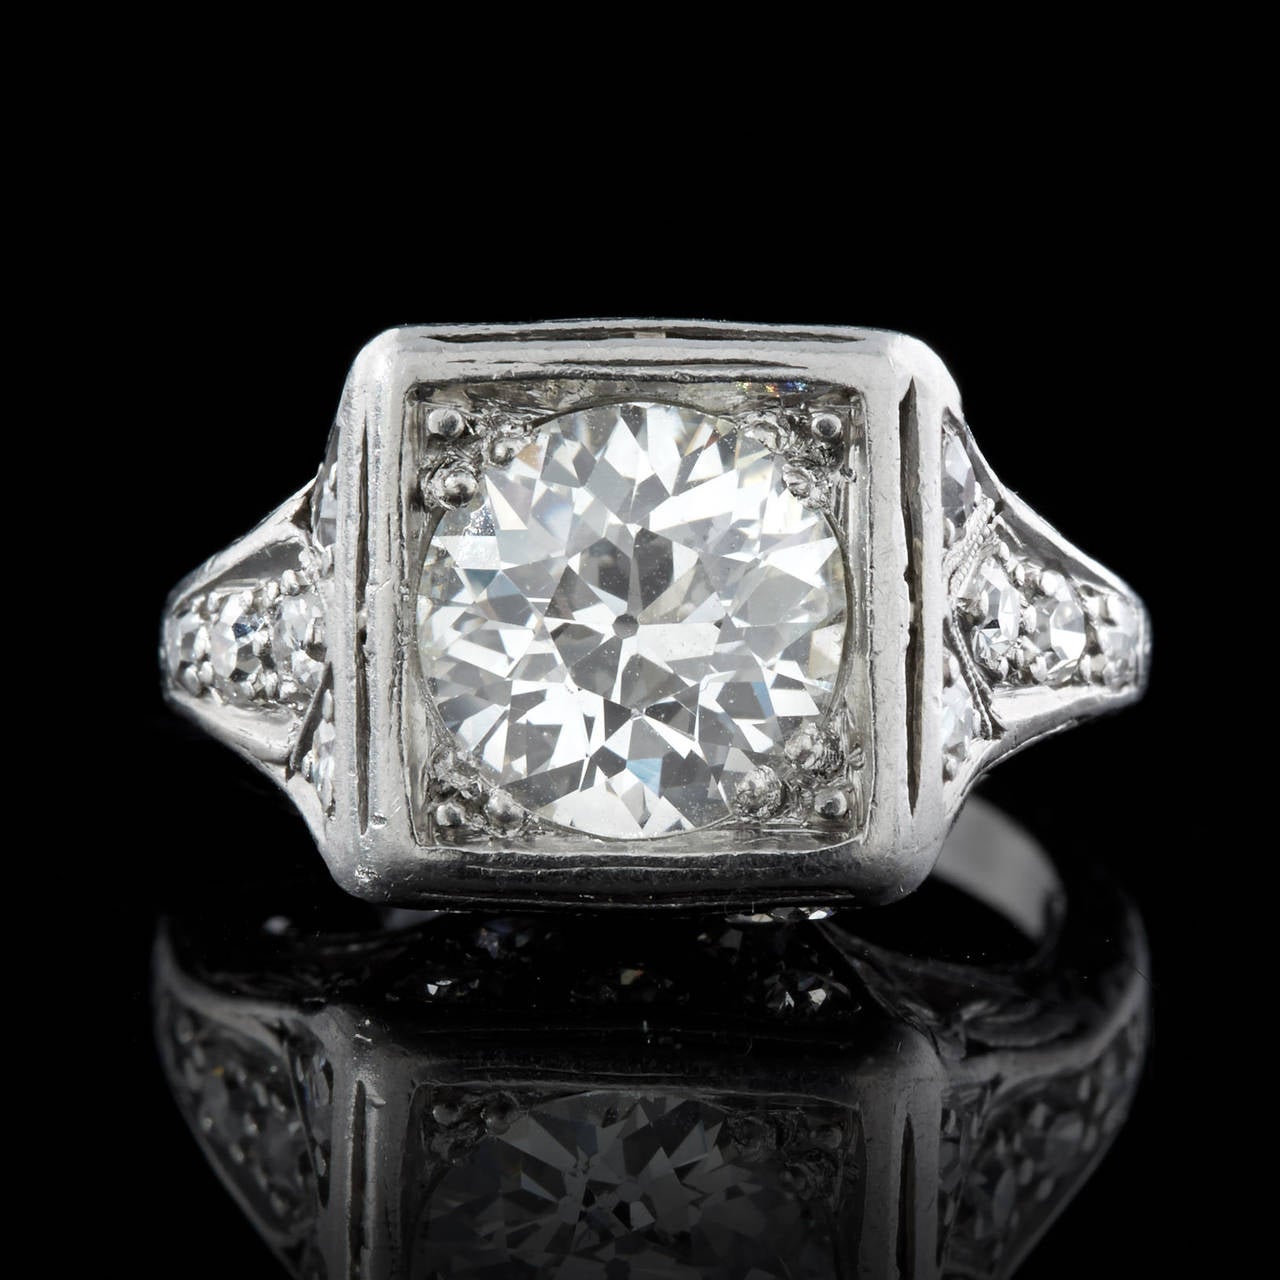 Estate 1920s Platinum Ring features a center 1.85 Carat I Color SI1 Clarity Old European Cut Diamond. There are 20 single cut diamonds totaling 0.54 carats accenting the top half of ring with openwork, milgrain detail, and engraving on the ring